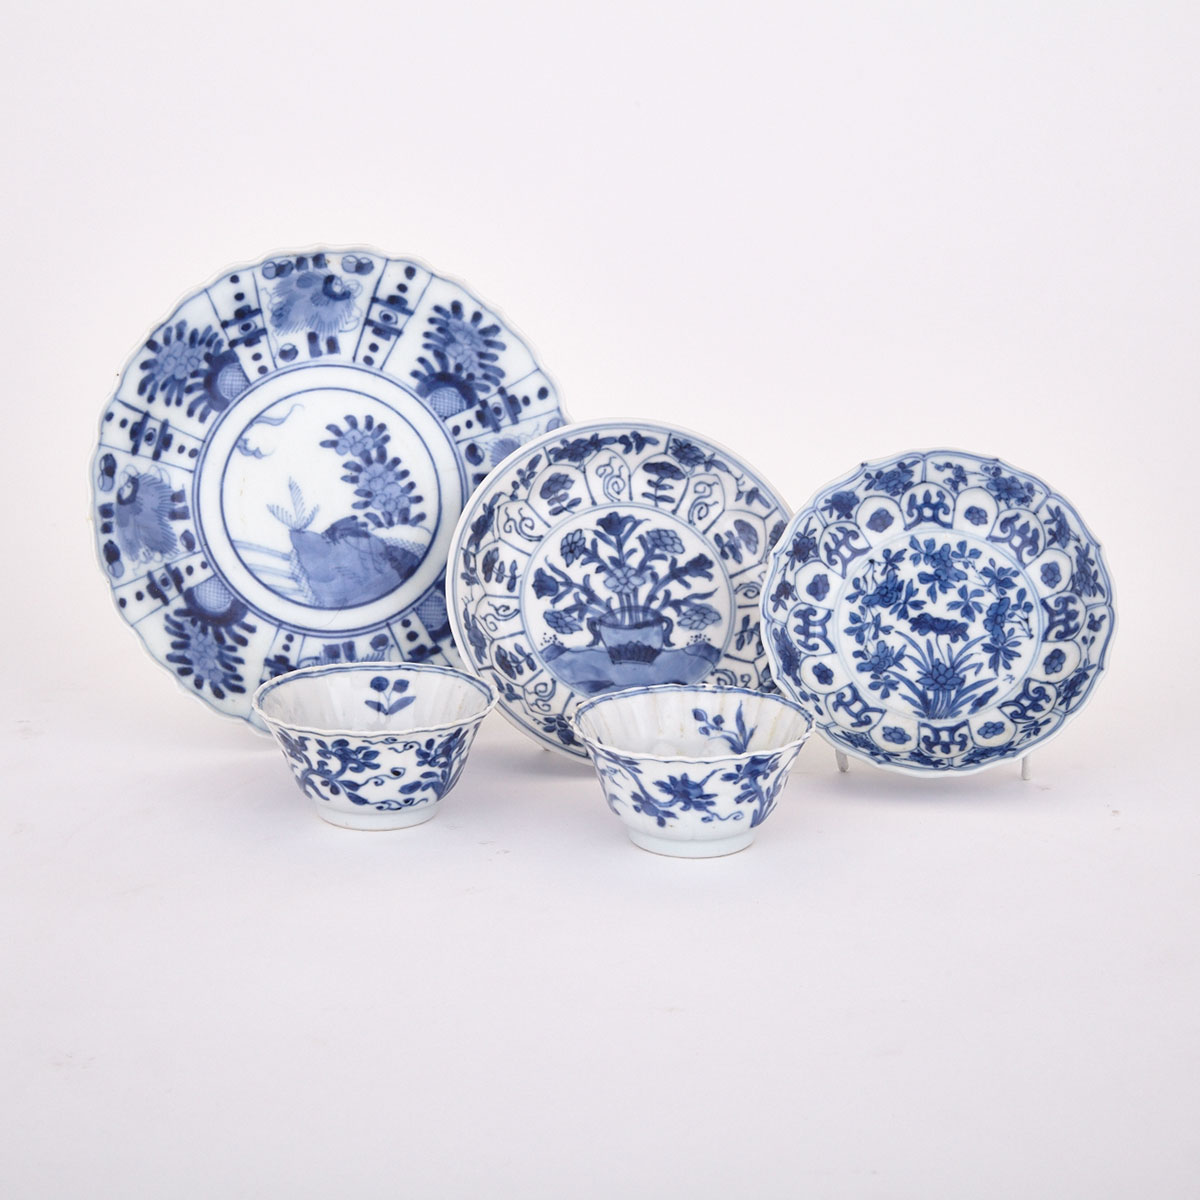 Blue and White Dishes and Cups, Kangxi Period